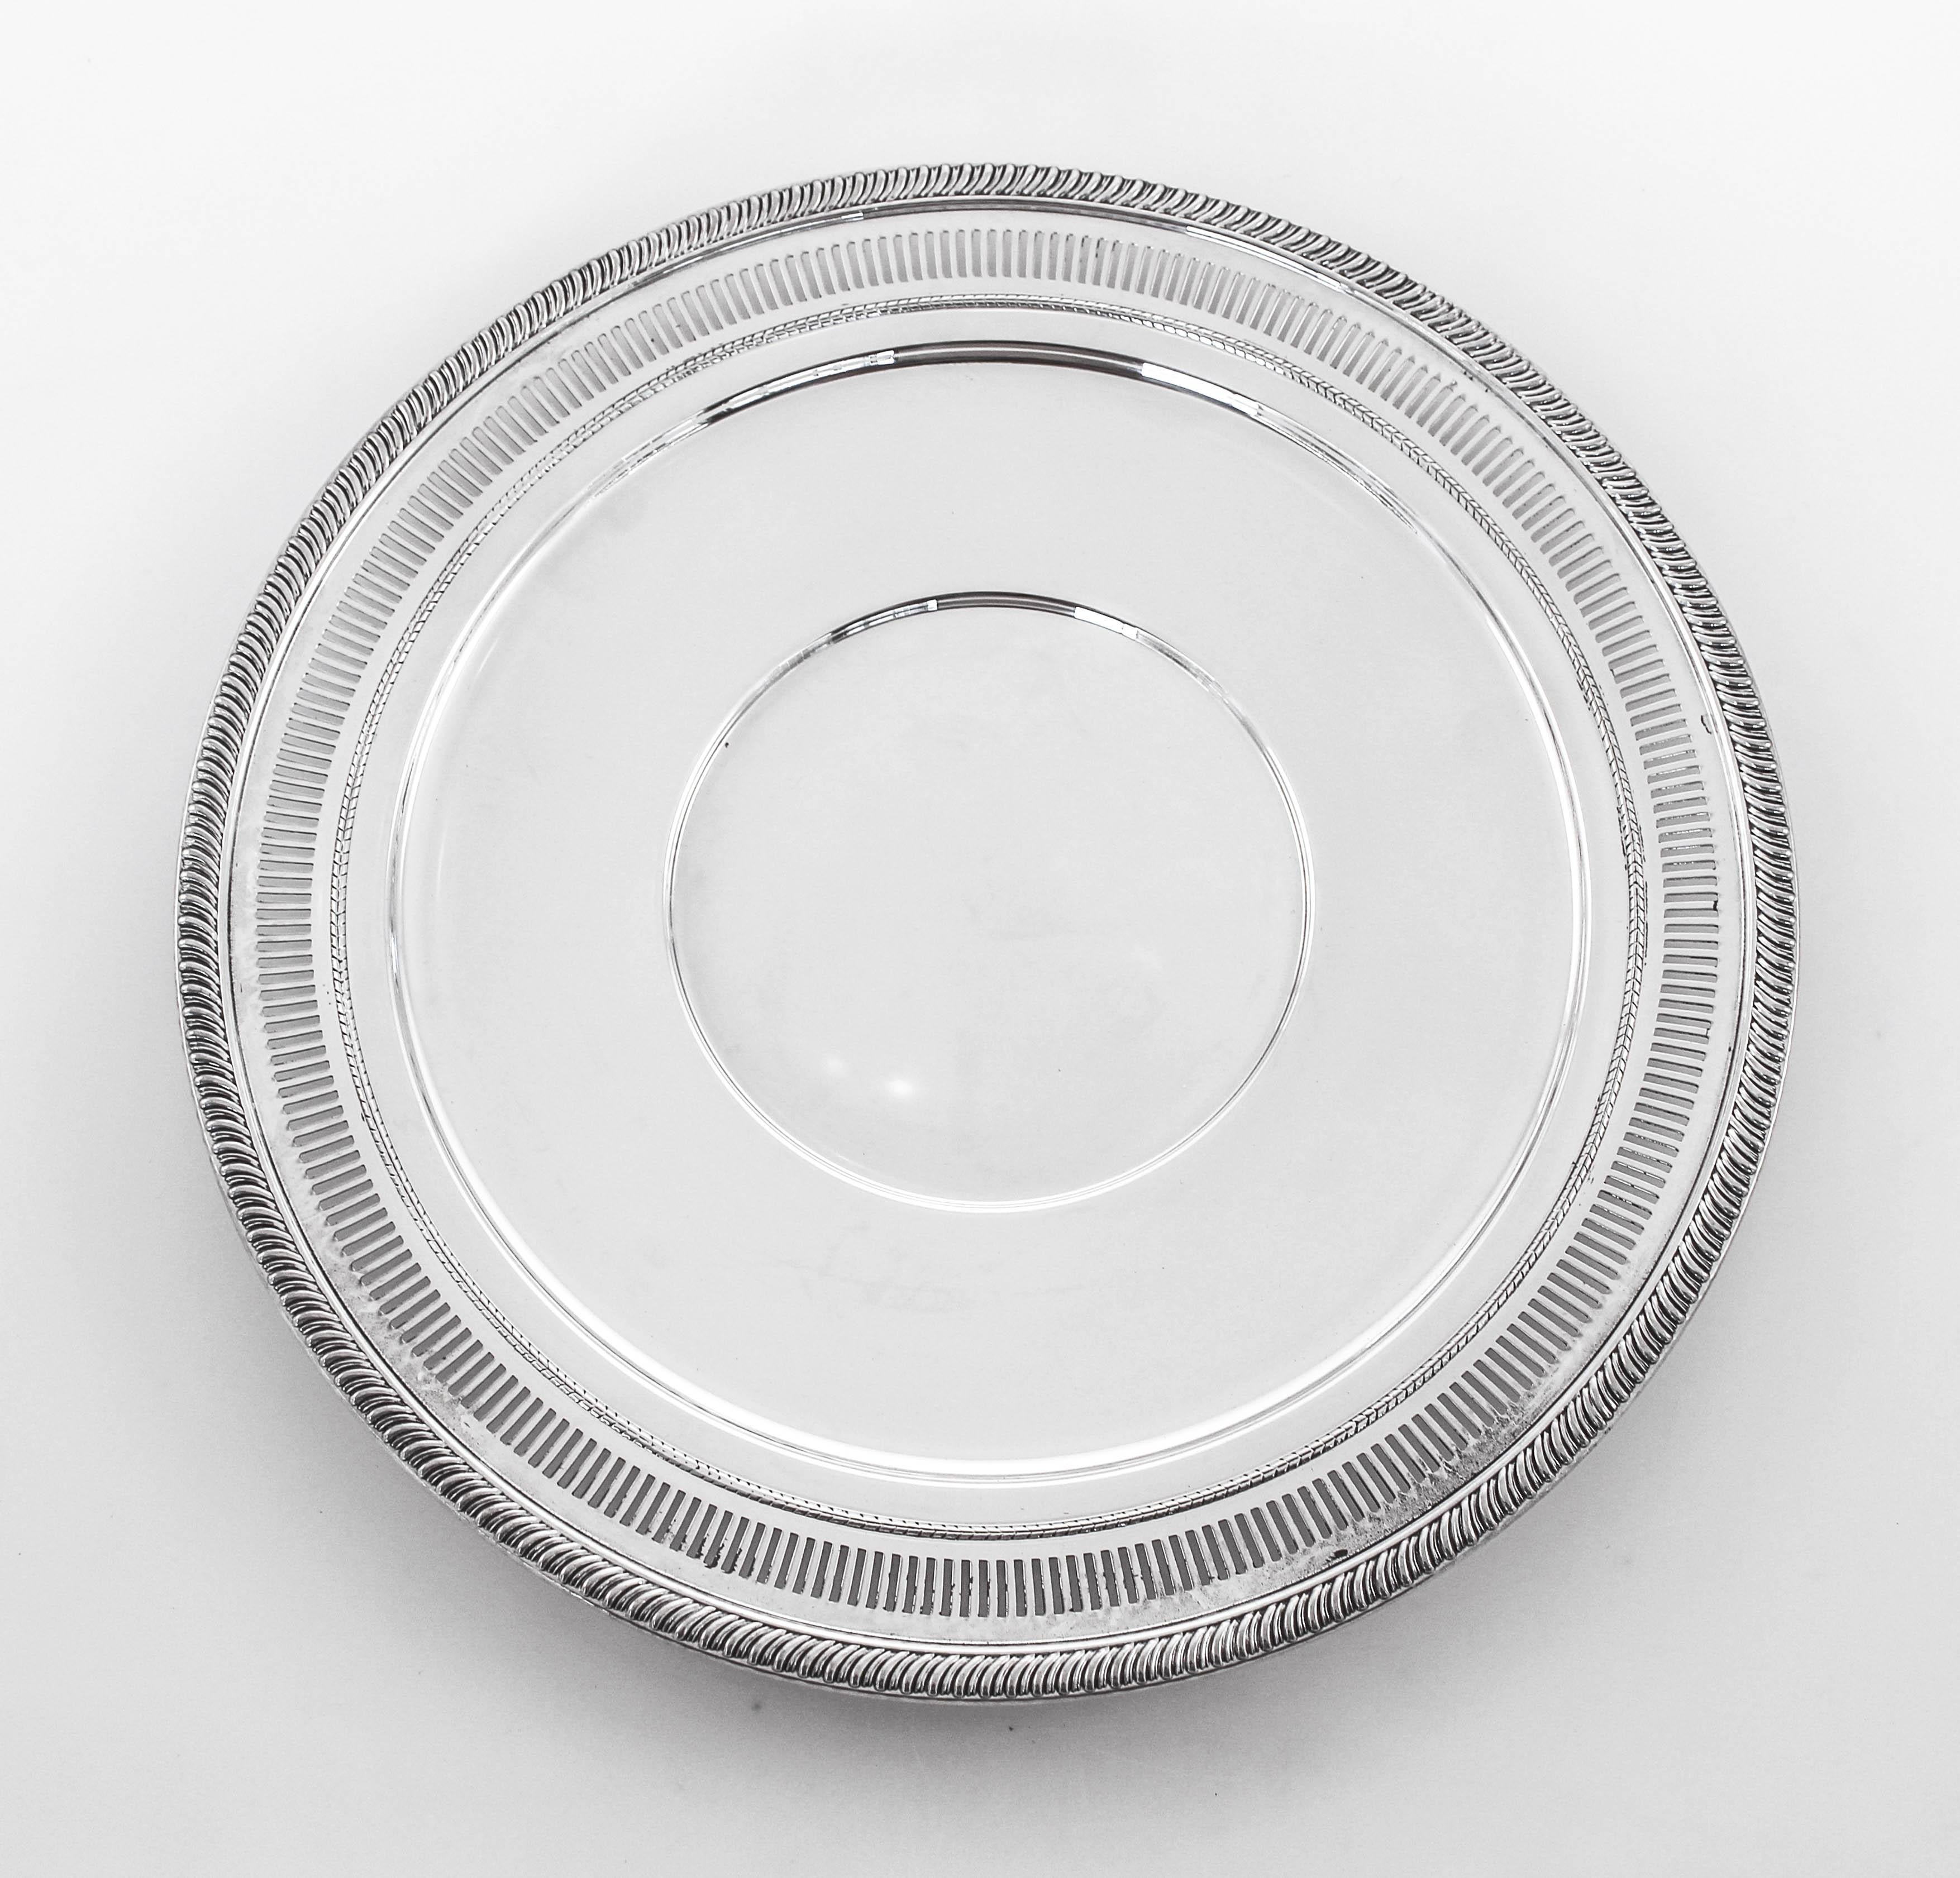 We are proud to offer this sterling silver plate made by Fisher Brothers Silver company. A gadroon design encircles the edge whilst on the inside border a series of cut-outs decorates it. It’s flat and that makes it ideal for hors d’oeuvres and